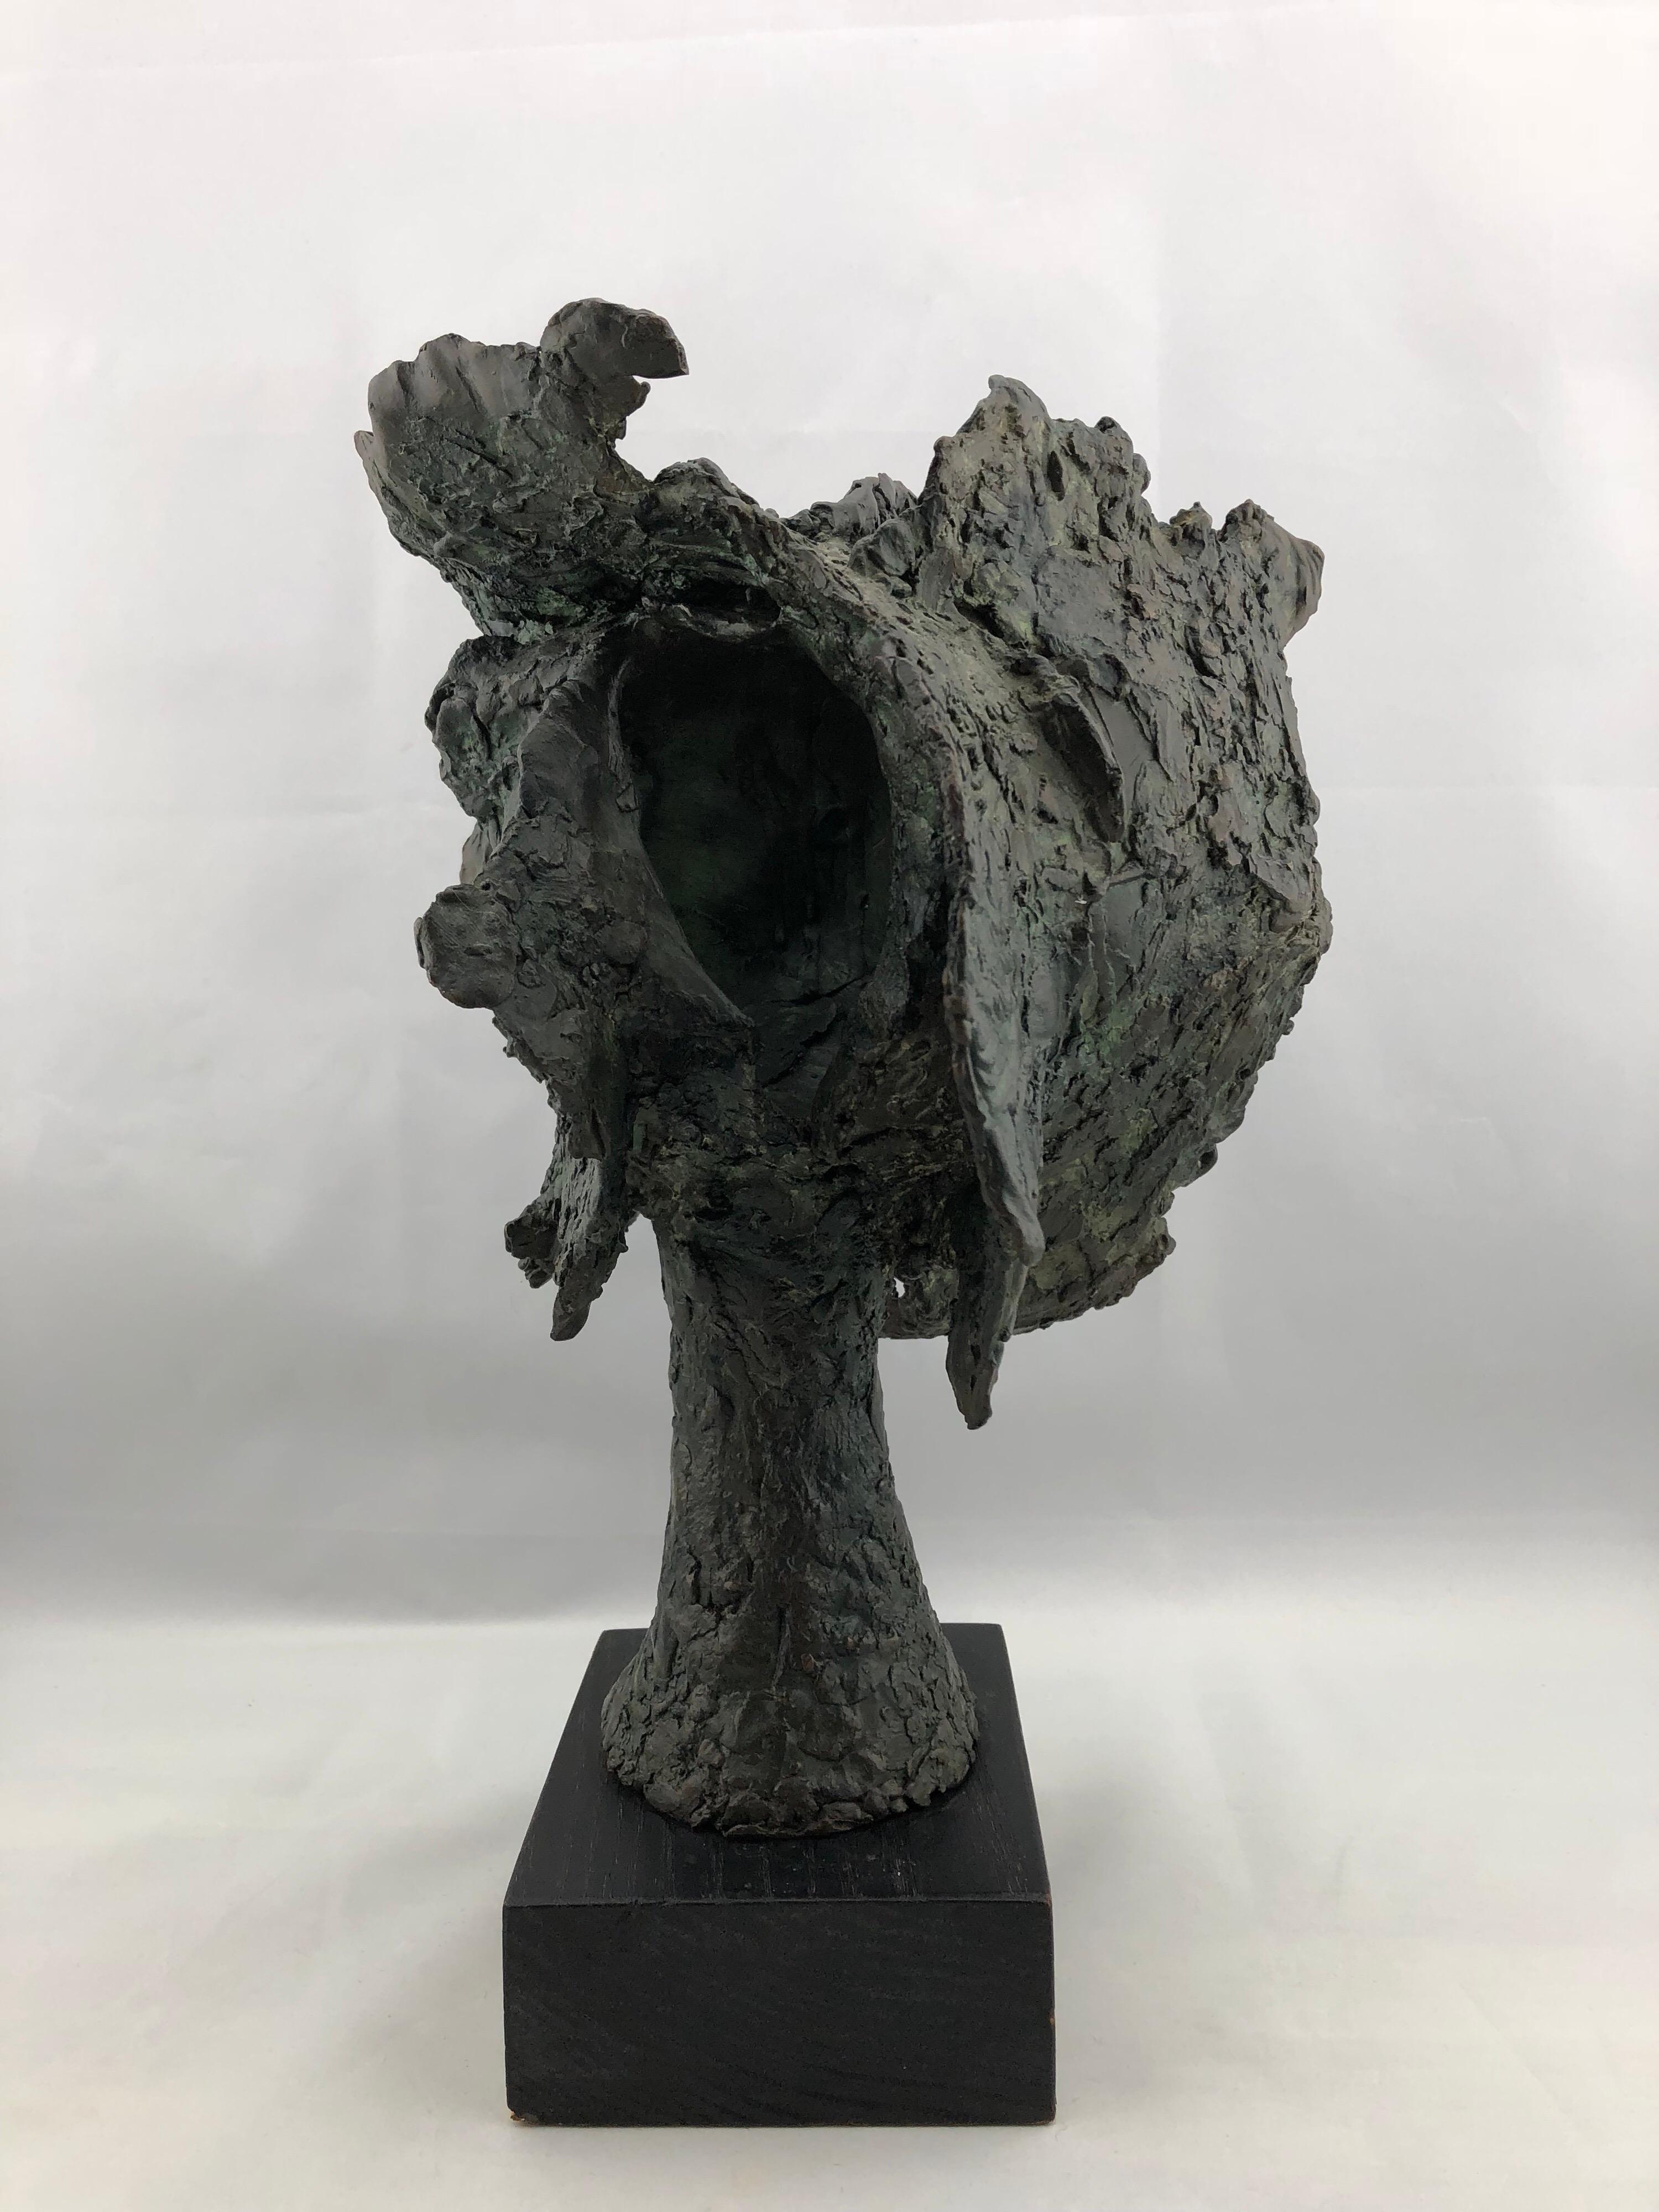 Rare Vintage Bronze Sculpture by Artist John Begg, Signed and Numbered 1 of 1 2